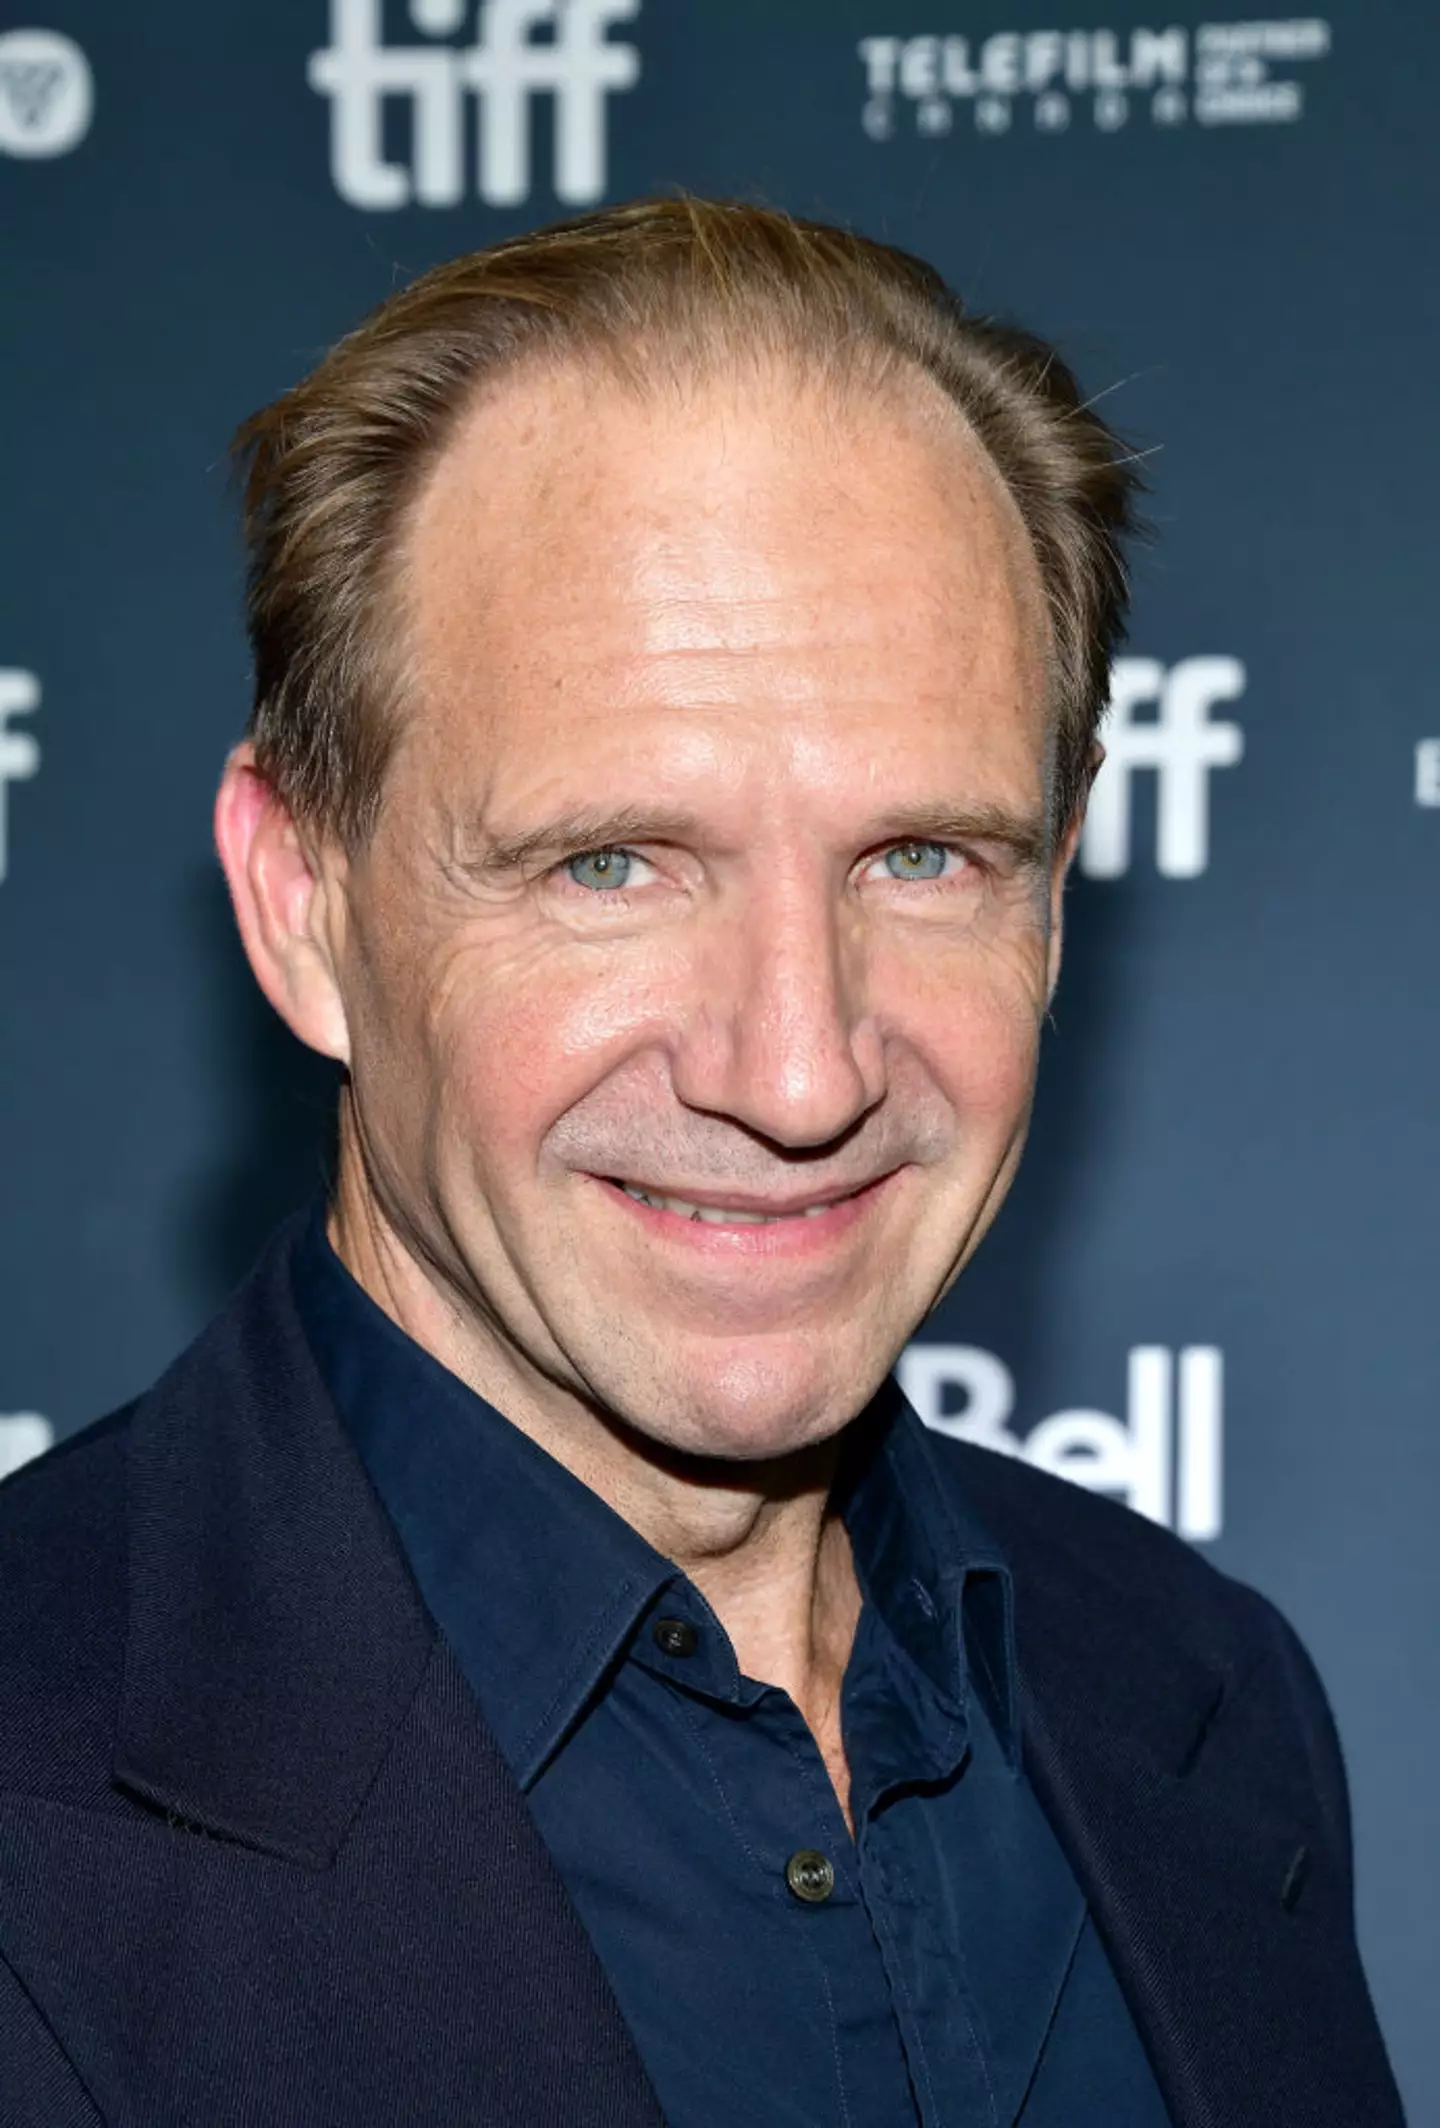 Ralph Fiennes described the 'verbal abuse' towards Rowling as 'disgusting'. (Araya Doheny/Getty Images)